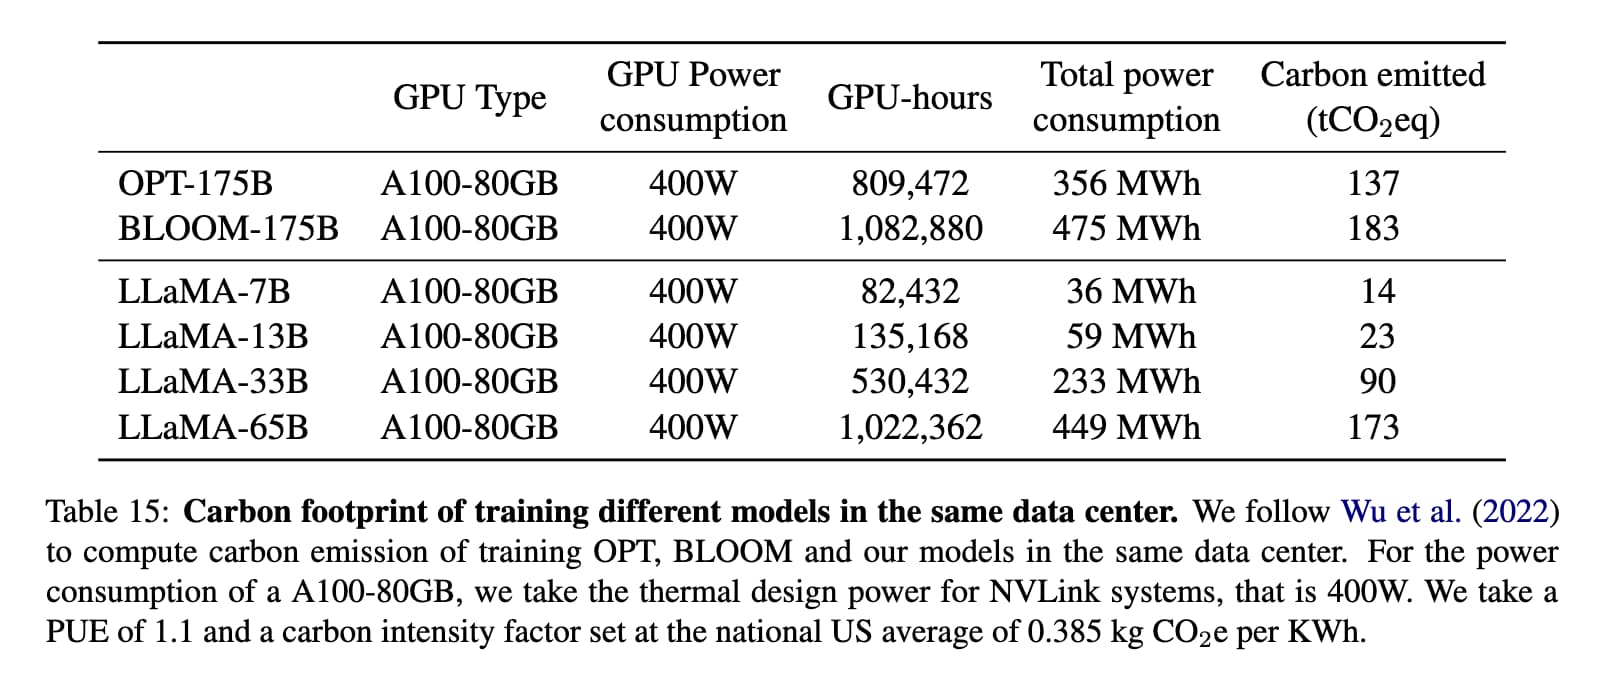 Table 15: Carbon footprint of training different models in the same data center. We follow Wu et al. (2022) to compute carbon emission of training OPT, BLOOM and our models in the same data center. For the power consumption of a A100-80GB, we take the thermal design power for NVLink systems, that is 400W. We take a PUE of 1.1 and a carbon intensity factor set at the national US average of 0.385 kg COze per KWh. Lists 6 models. OPT-175B: 809,472 GPU hours, 356 MWh, 137 tons CO2. BLOOM-175B: 1,082,880 GPU hours, 475 MWh, 183 tons. LLaMA-7B: 82,432 GPU hours, 36 MWh, 14 tons. LLaMA-13B: 135,168 GPU hours, 59 MWh, 23 tons. LLaMA-33B: 530,432 GPU hours, 233 MWh, 90 tons. LLaMA-65B: 1,022,362 GPU hours, 449 MWh, 173 tons.